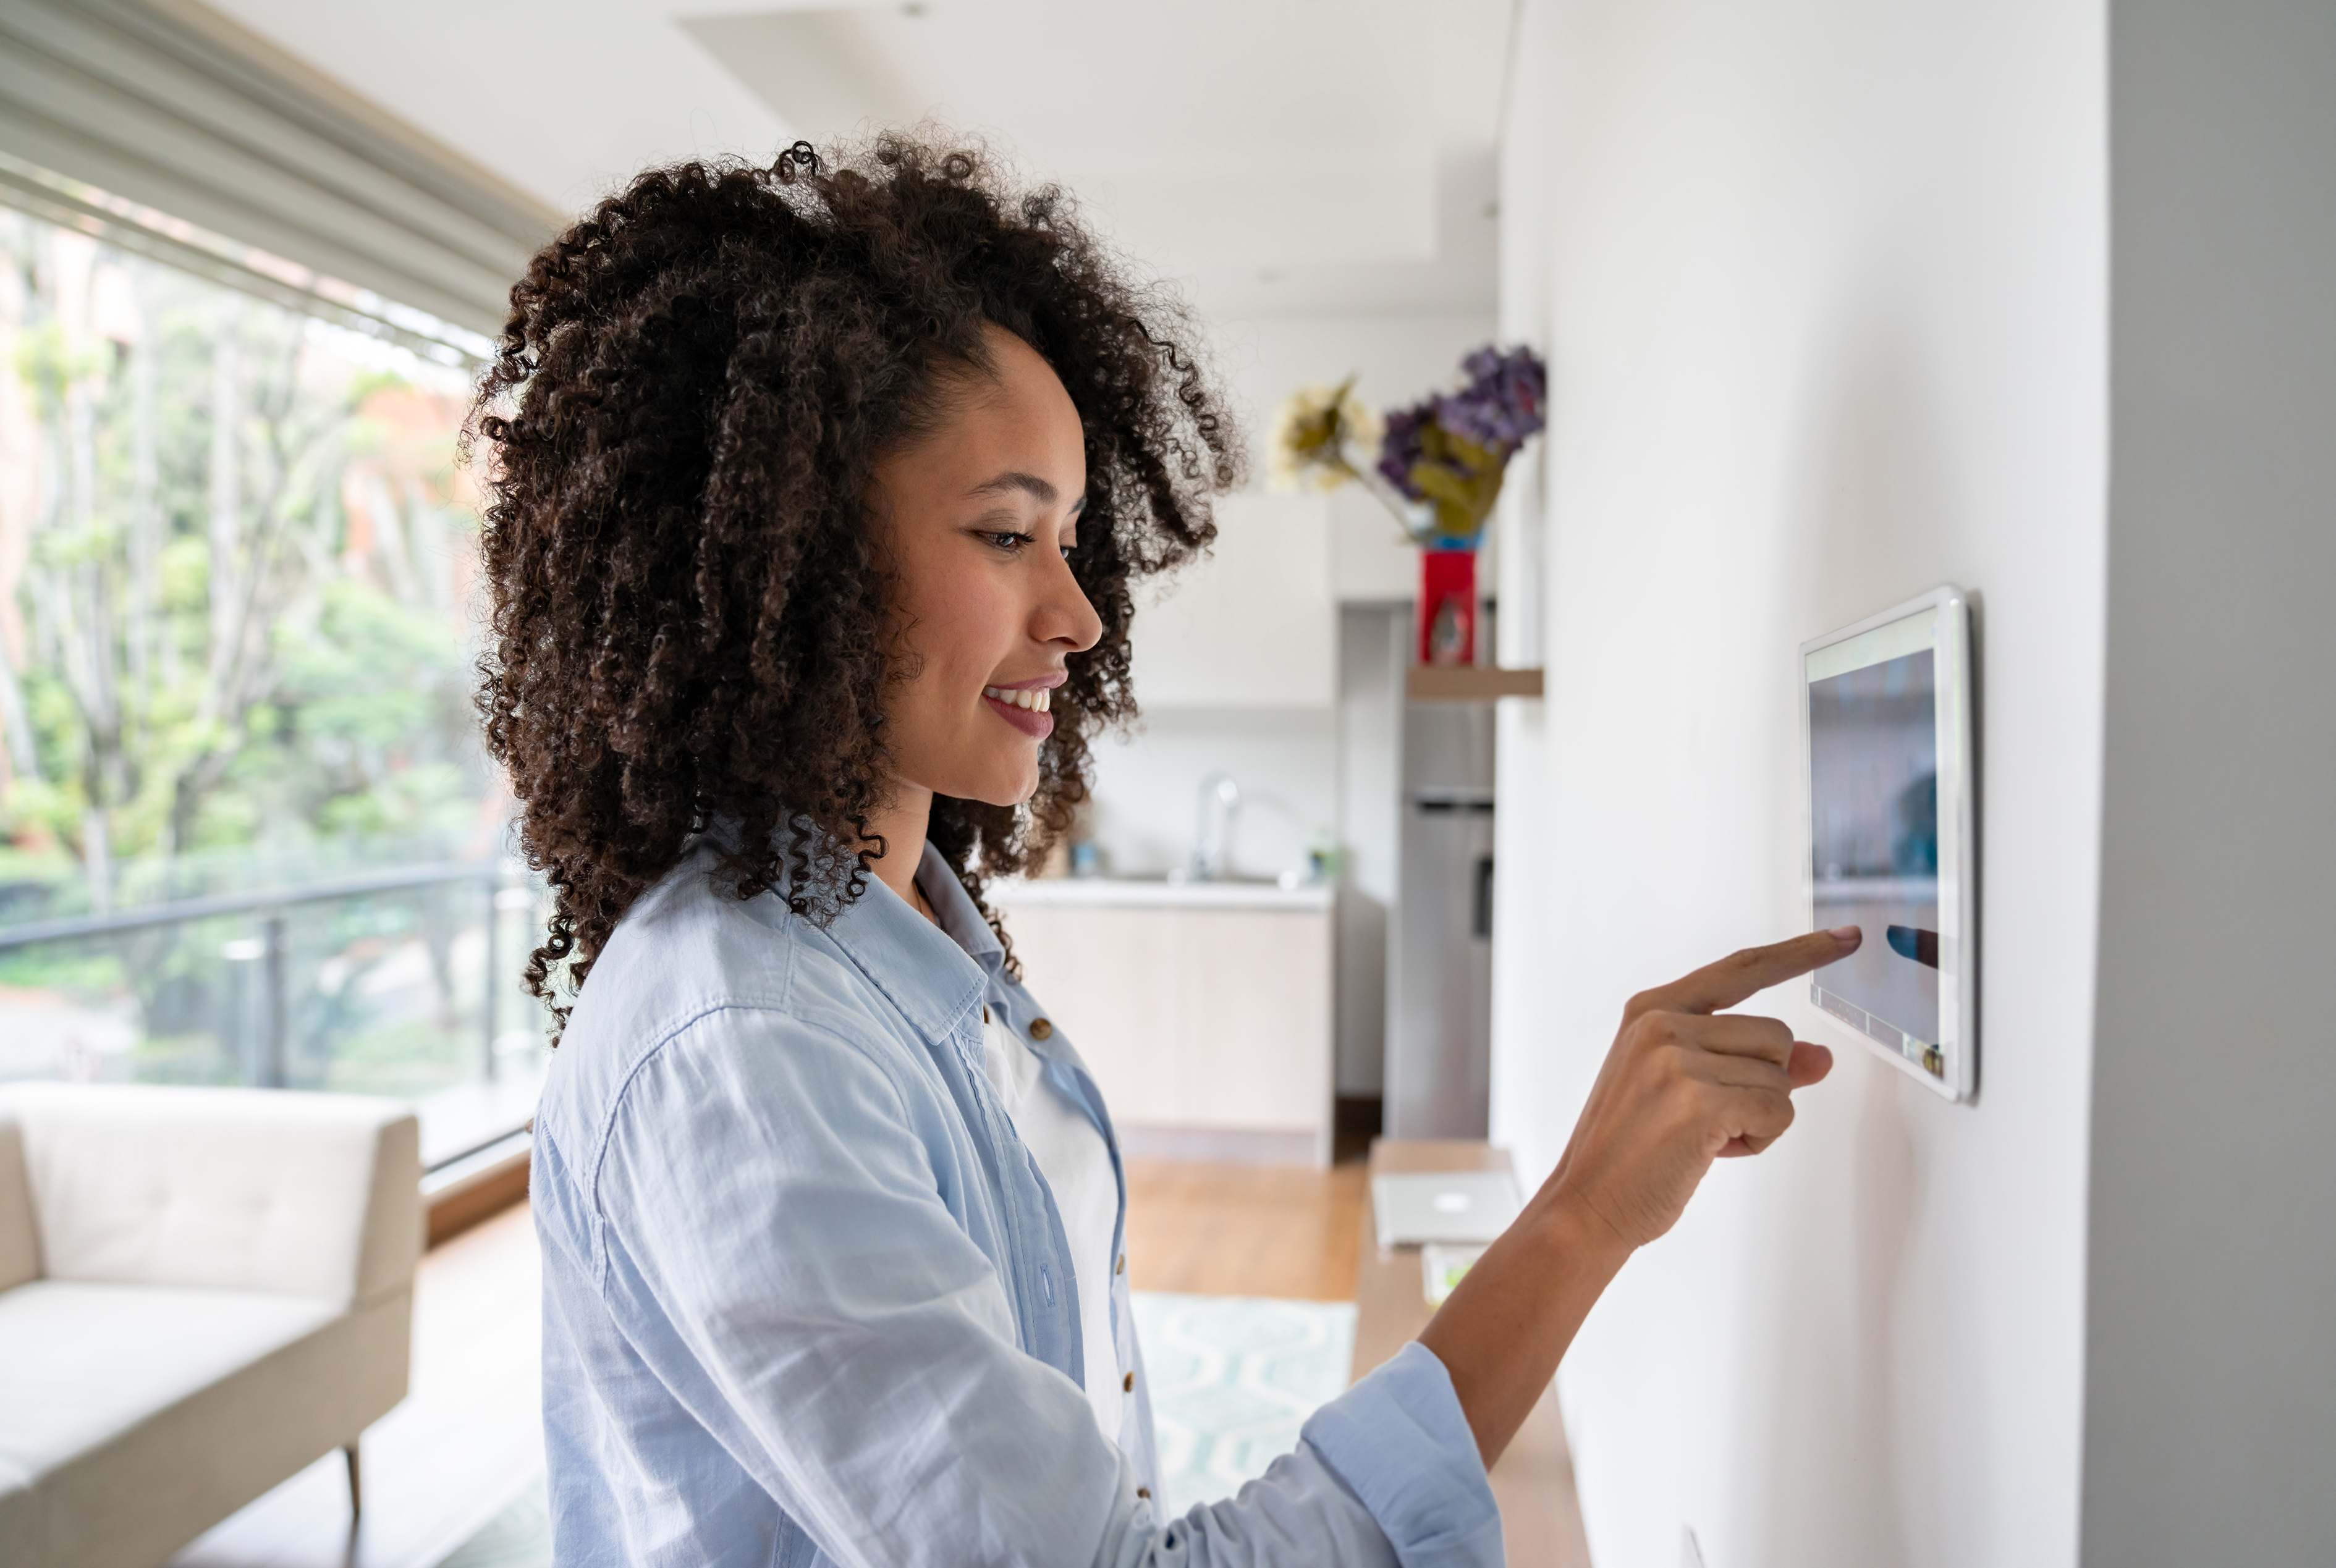 Five Smart Home Technology Trends